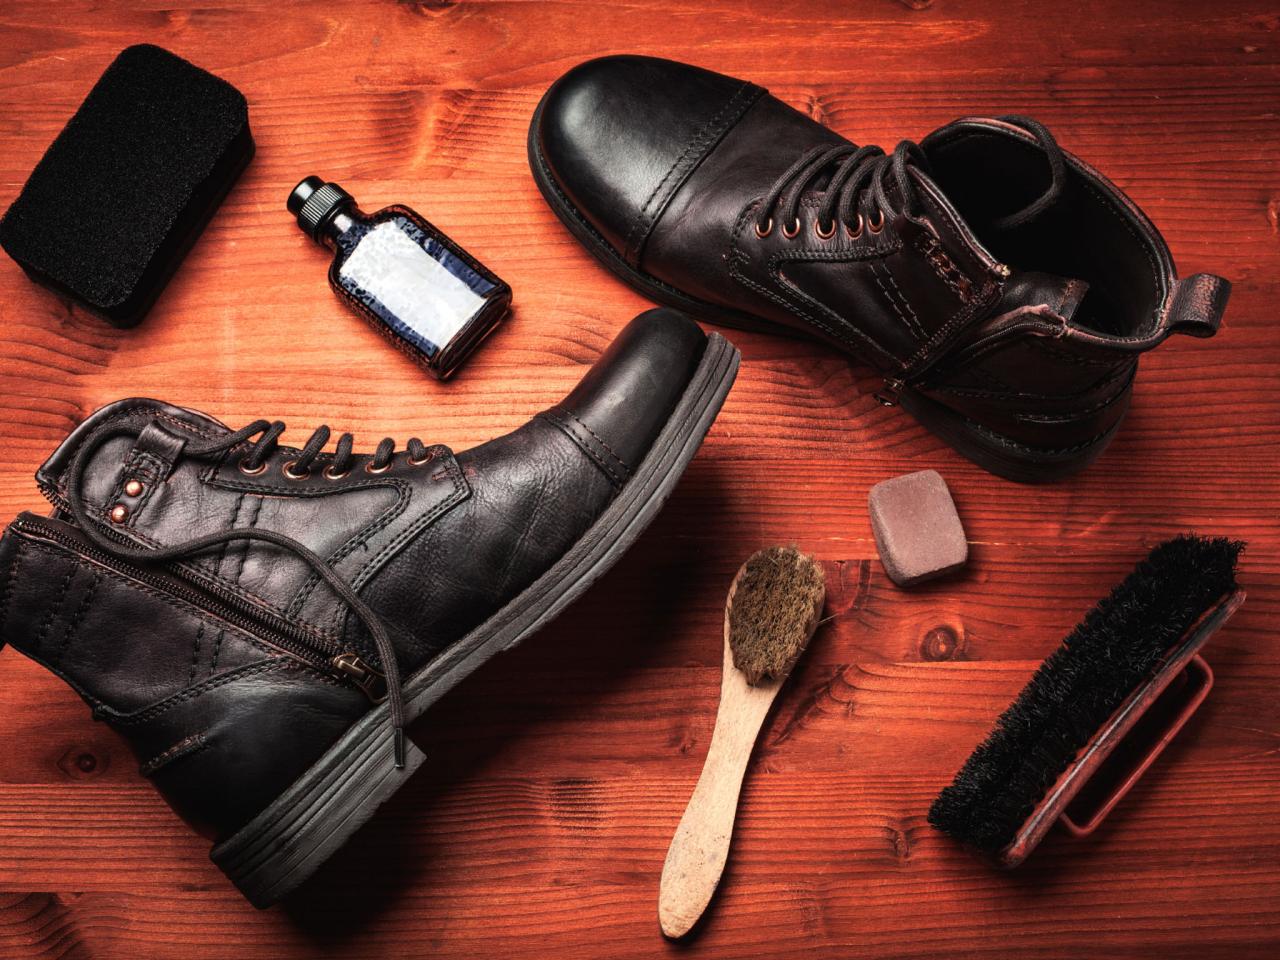 How To Clean Leather Shoes And Boots, How To Get Red Wine Stain Out Of Leather Shoes